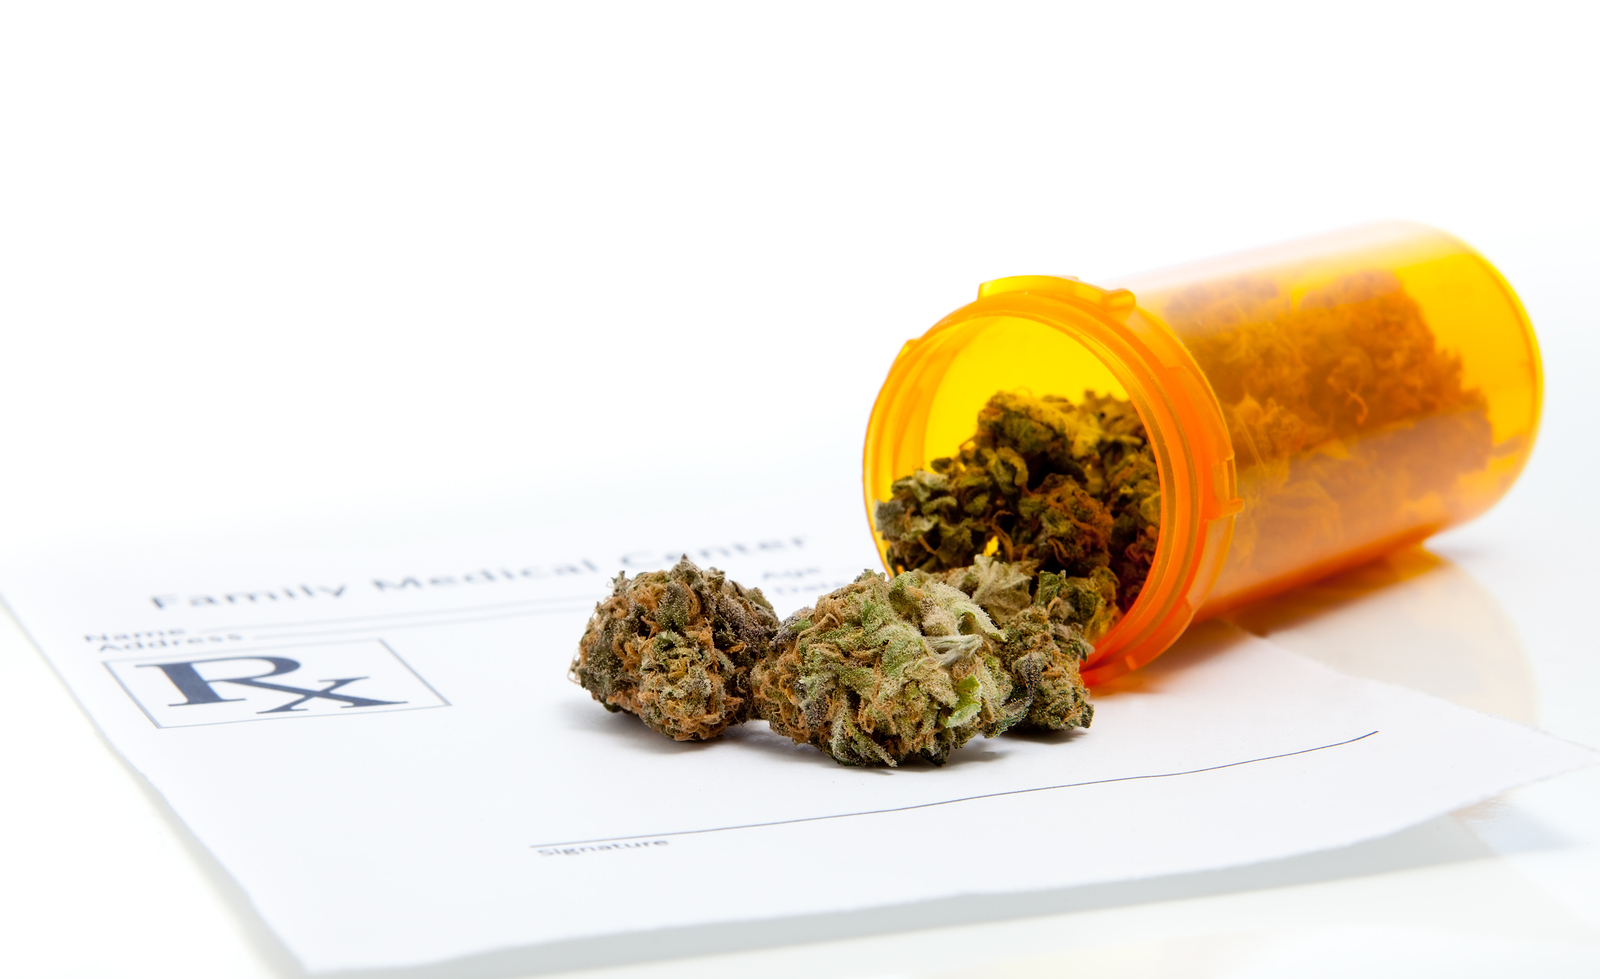 Dr. Tammy Hale Post (Springdale) writing medical cannabis certifications